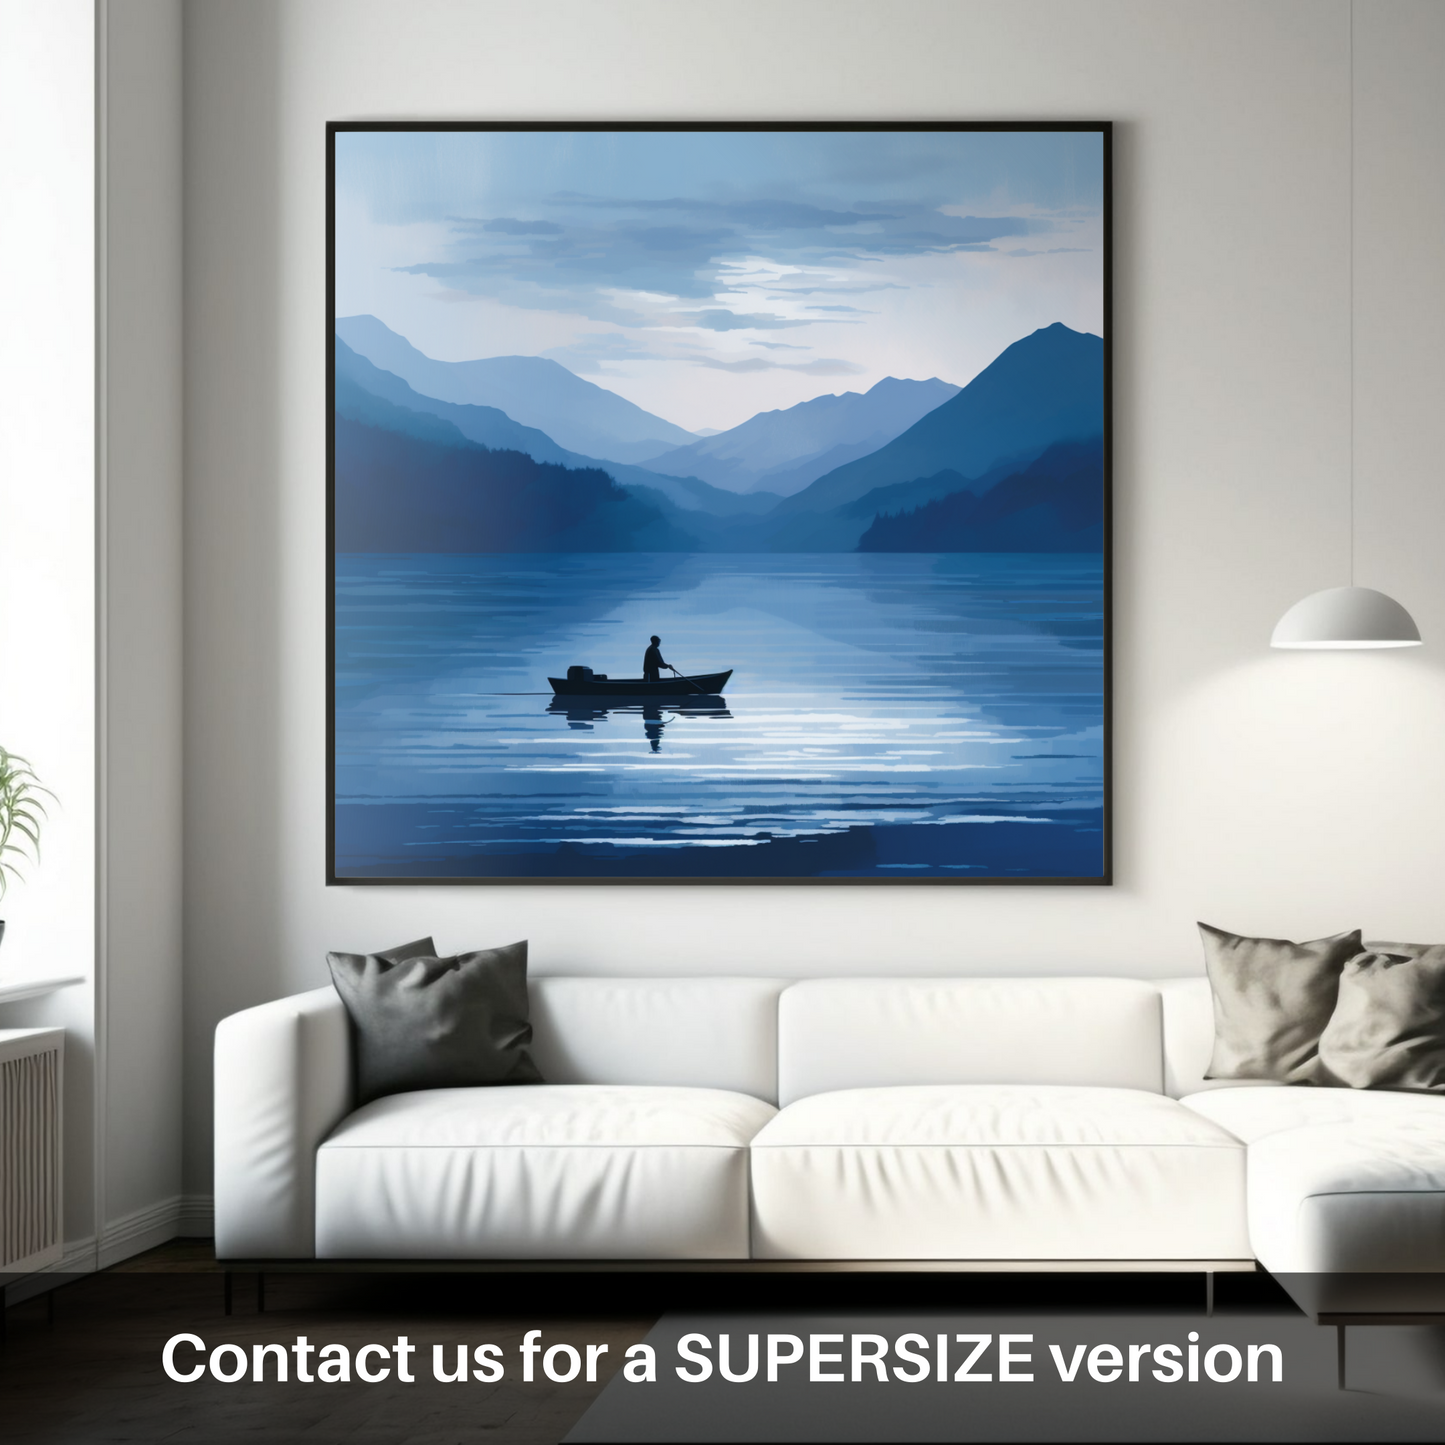 Huge supersize print of Silhouetted fisherman on Loch Lomond